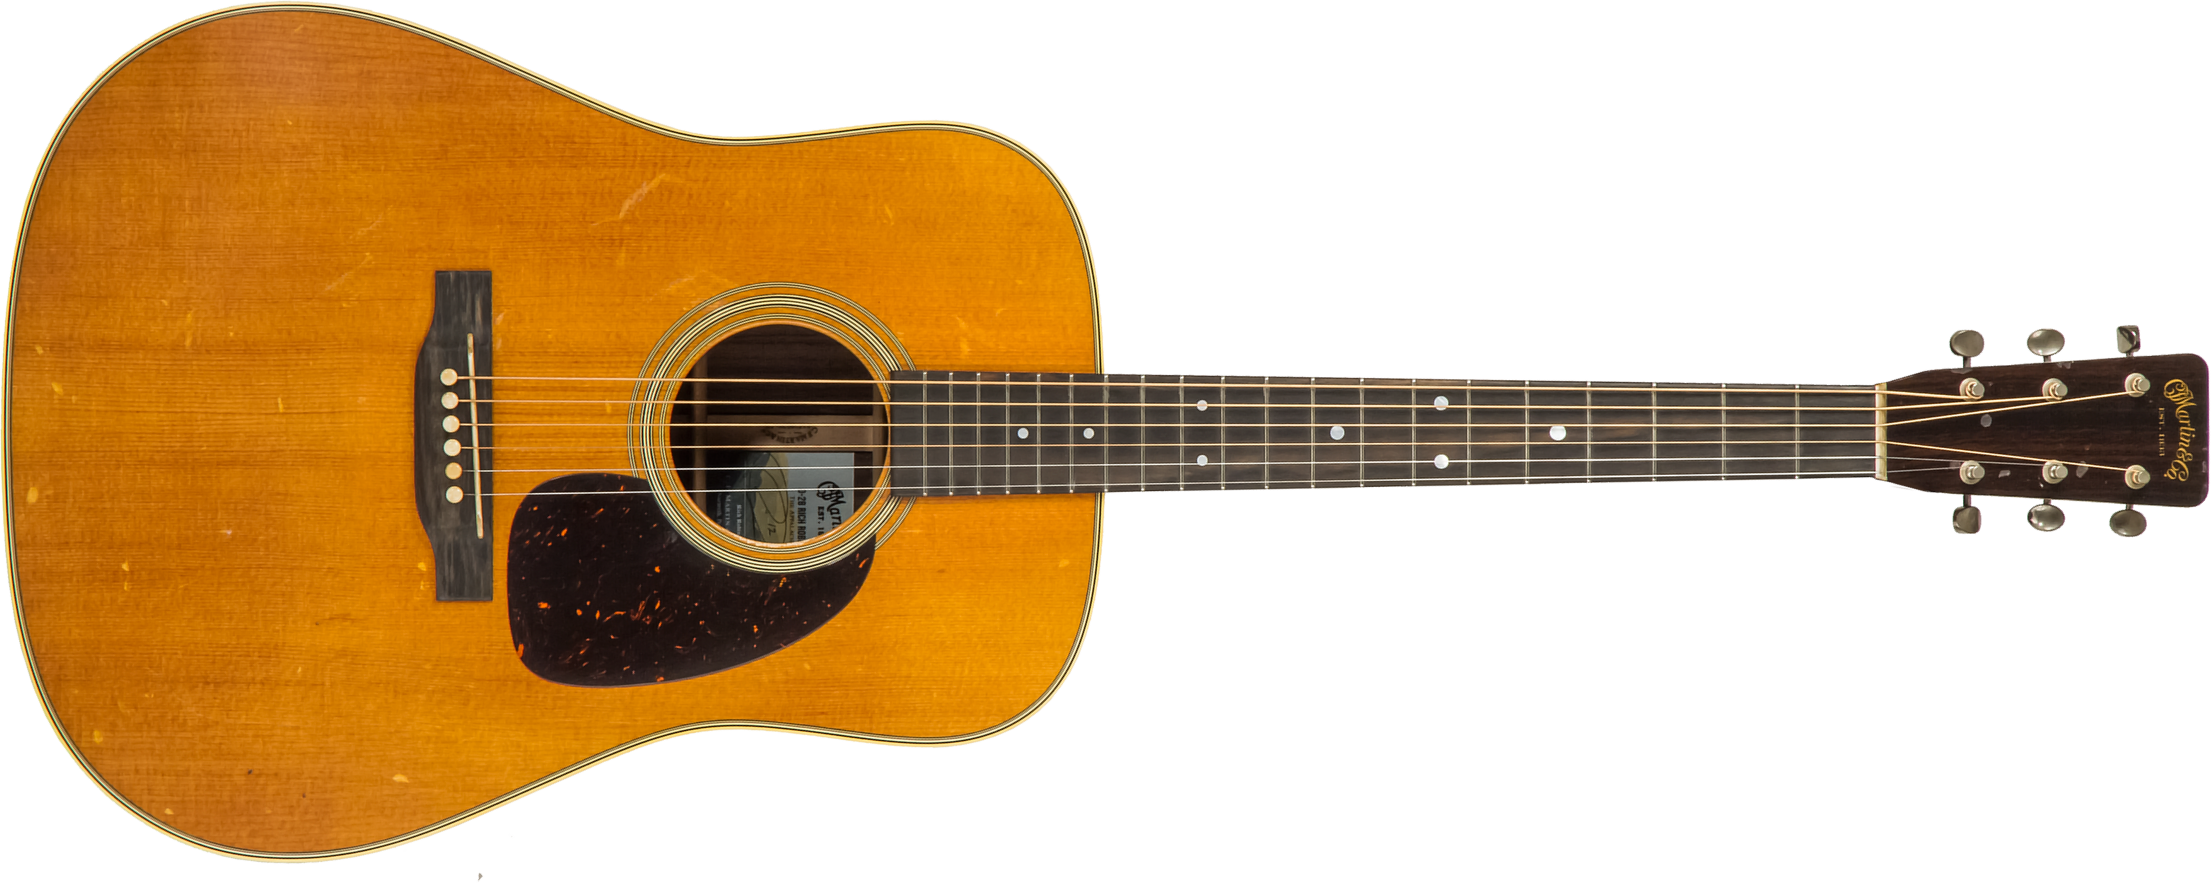 Martin Rich Robinson D-28 Signature Dreadnought Epicea Palissandre Eb #2640217 - Aged Vintage Natural Gloss - Acoustic guitar & electro - Main picture